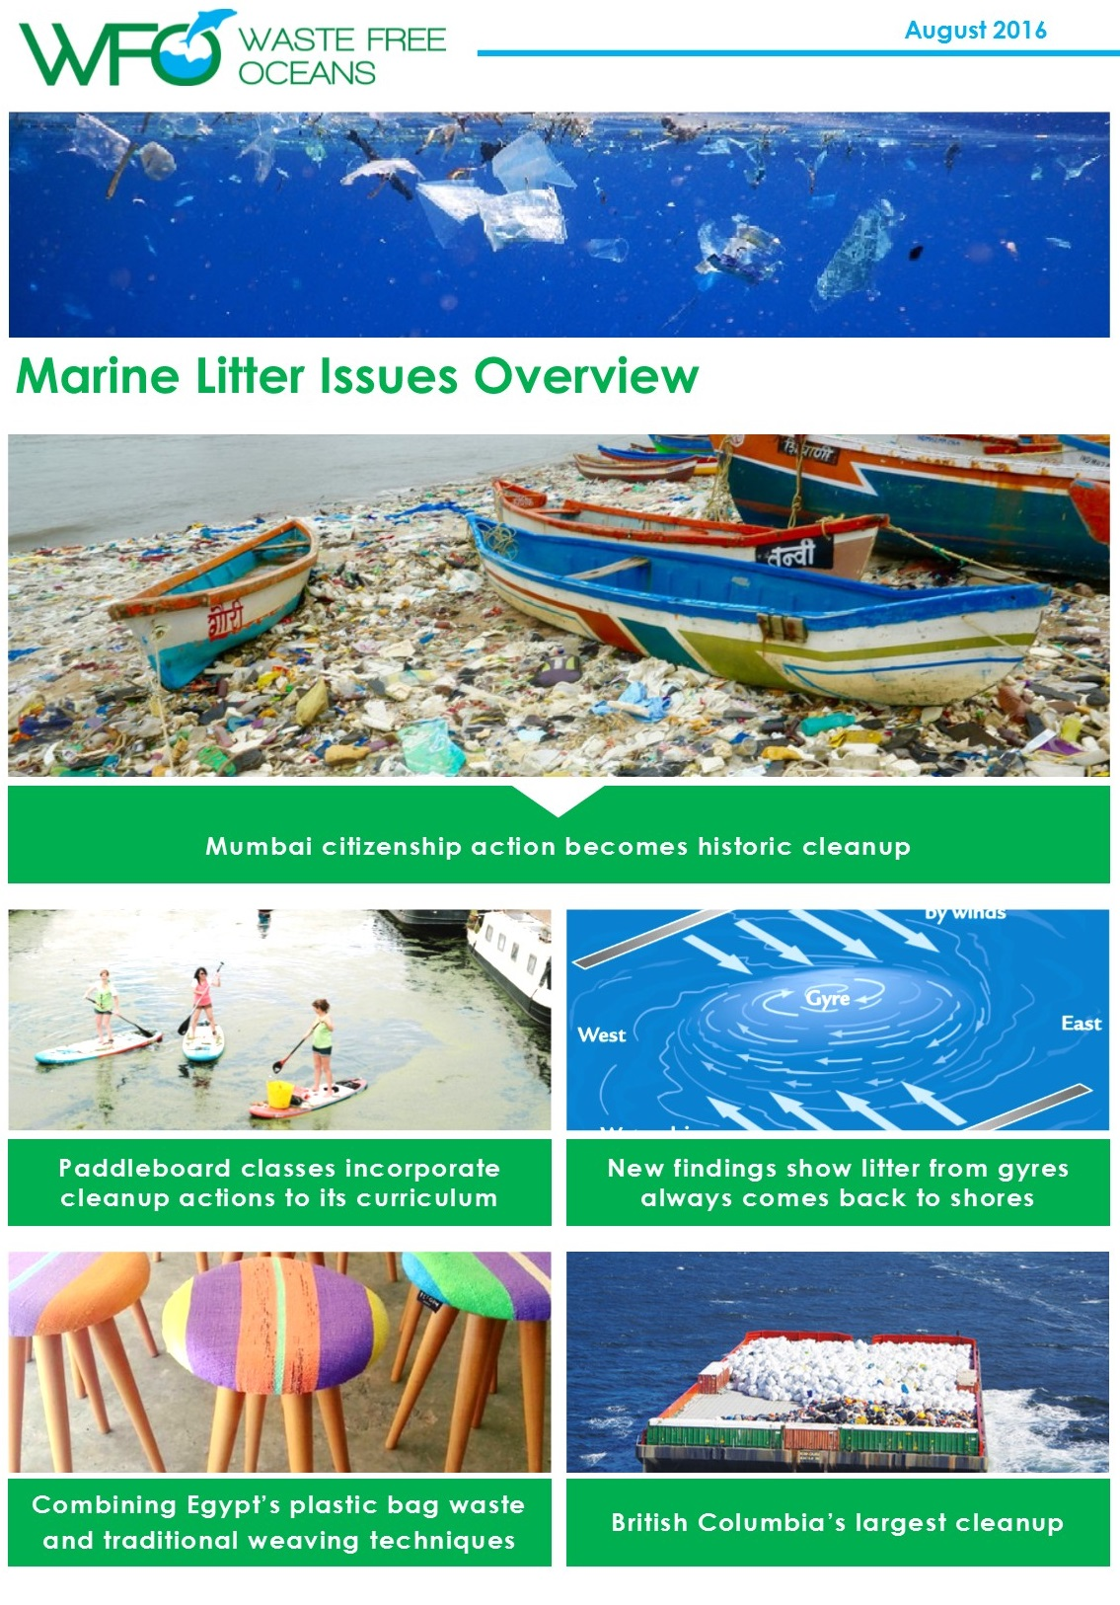 WFO Marine Litter Issues Overview - August 2016